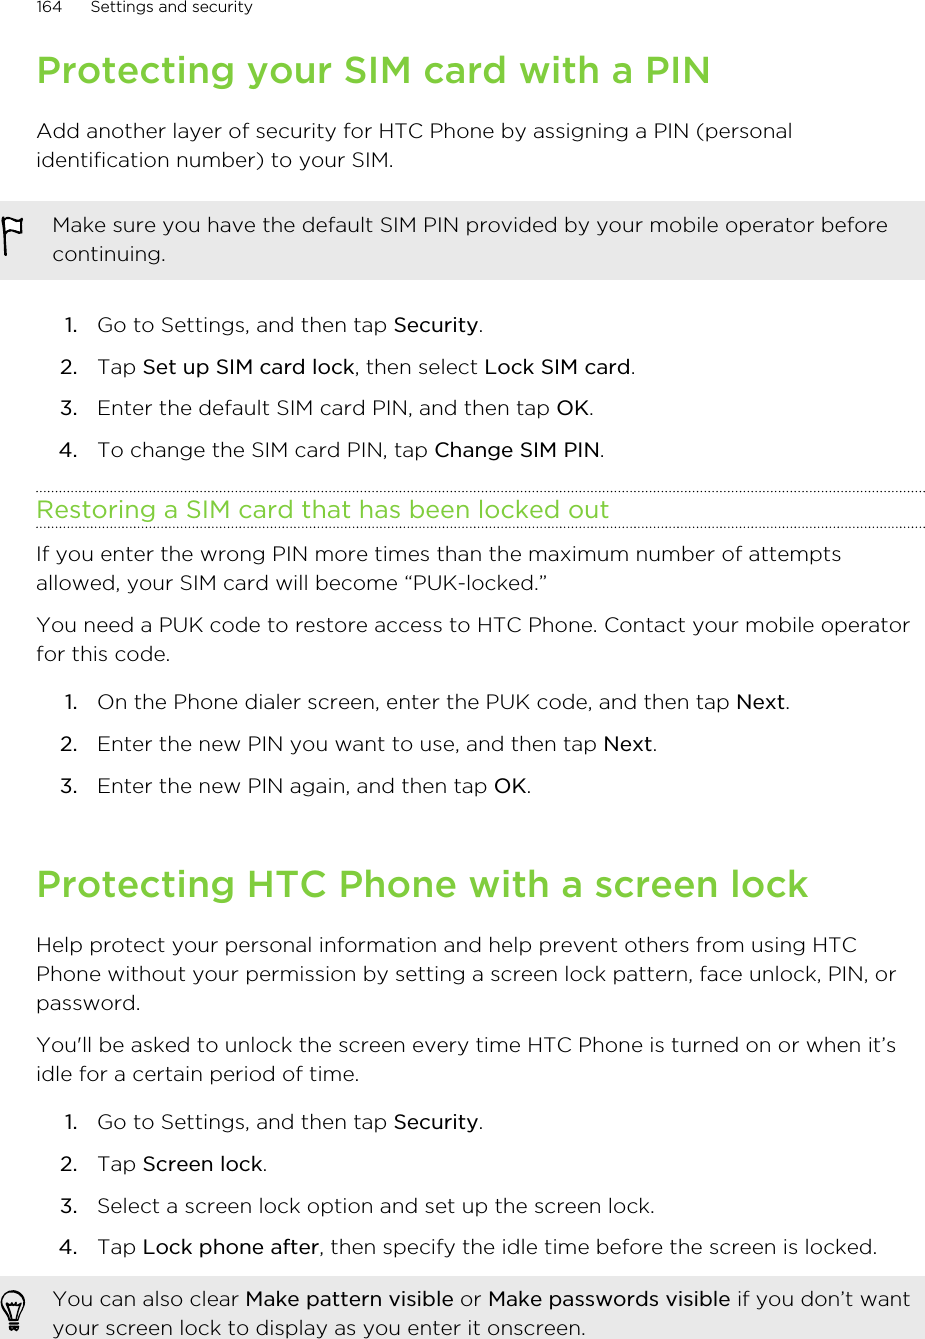 Protecting your SIM card with a PINAdd another layer of security for HTC Phone by assigning a PIN (personalidentification number) to your SIM.Make sure you have the default SIM PIN provided by your mobile operator beforecontinuing.1. Go to Settings, and then tap Security.2. Tap Set up SIM card lock, then select Lock SIM card.3. Enter the default SIM card PIN, and then tap OK.4. To change the SIM card PIN, tap Change SIM PIN.Restoring a SIM card that has been locked outIf you enter the wrong PIN more times than the maximum number of attemptsallowed, your SIM card will become “PUK-locked.”You need a PUK code to restore access to HTC Phone. Contact your mobile operatorfor this code.1. On the Phone dialer screen, enter the PUK code, and then tap Next.2. Enter the new PIN you want to use, and then tap Next.3. Enter the new PIN again, and then tap OK.Protecting HTC Phone with a screen lockHelp protect your personal information and help prevent others from using HTCPhone without your permission by setting a screen lock pattern, face unlock, PIN, orpassword.You&apos;ll be asked to unlock the screen every time HTC Phone is turned on or when it’sidle for a certain period of time.1. Go to Settings, and then tap Security.2. Tap Screen lock.3. Select a screen lock option and set up the screen lock.4. Tap Lock phone after, then specify the idle time before the screen is locked. You can also clear Make pattern visible or Make passwords visible if you don’t wantyour screen lock to display as you enter it onscreen.164 Settings and securityHTC Confidential for Certification HTC Confidential for Certification 